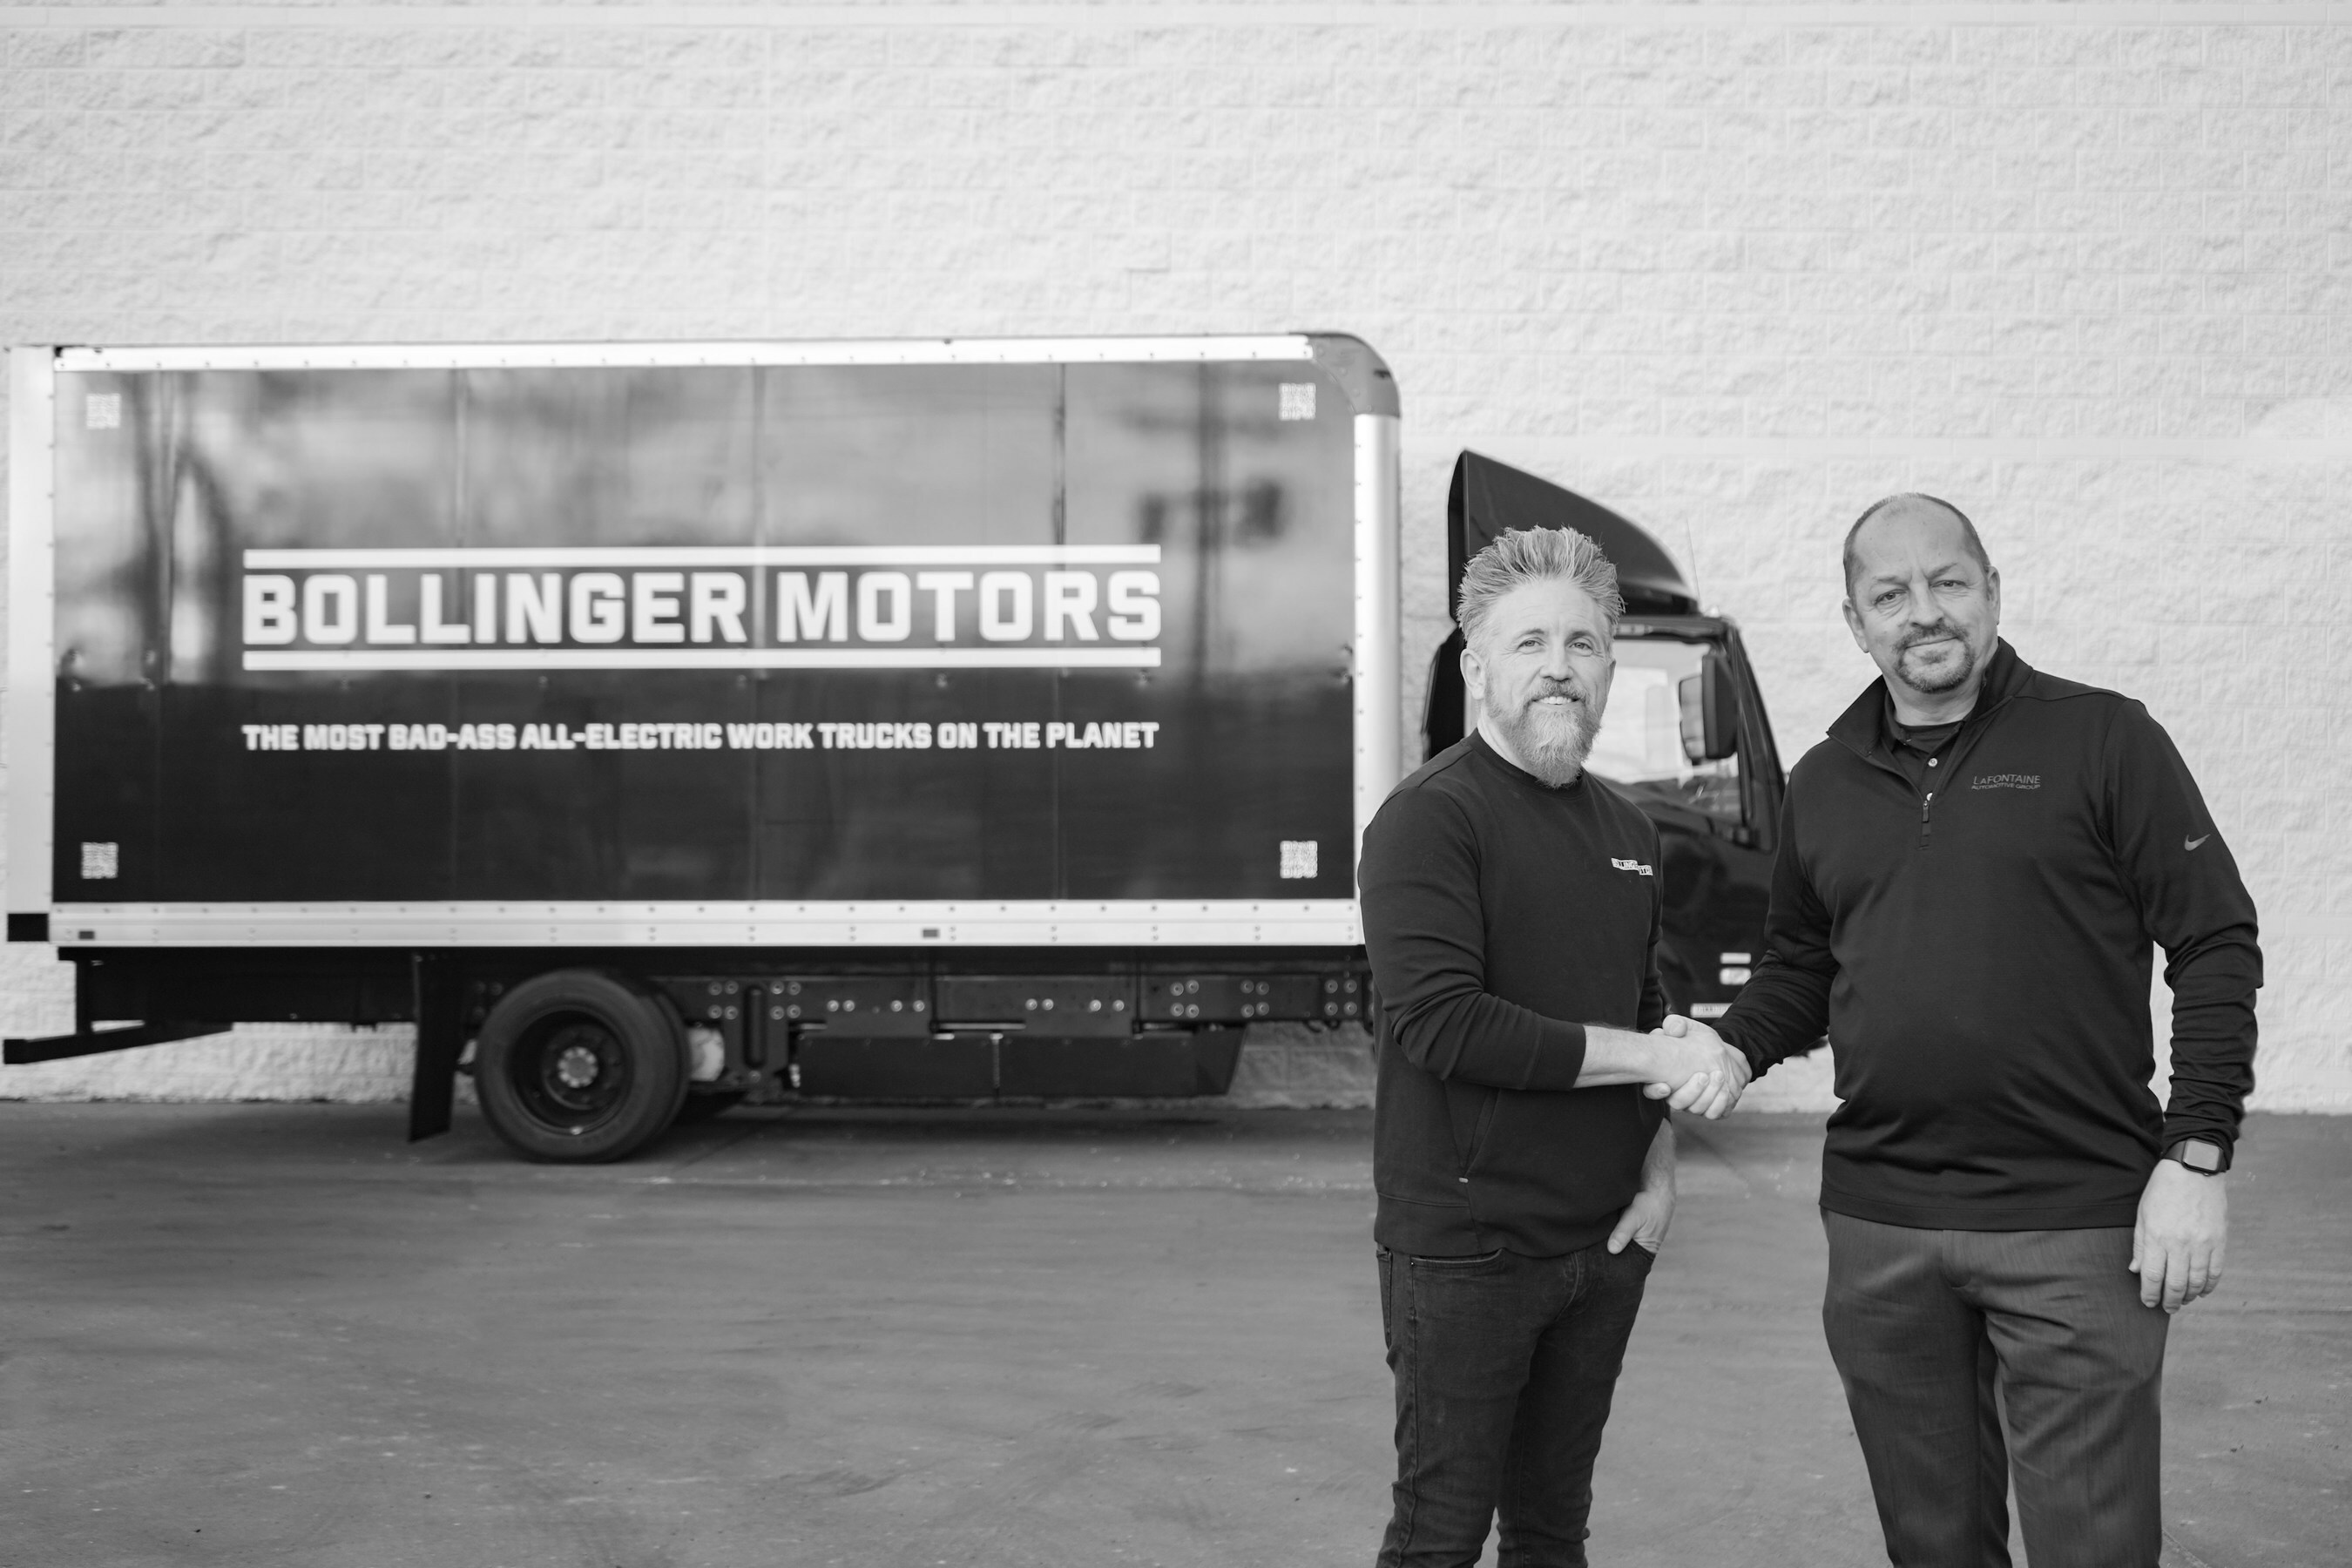 Jim Connelly, chief revenue officer at Bollinger Motors. and Brian Frania, commercial and fleet director, LaFontaine Automotive Group, are kicking off the first sales and service dealership in Michigan for the commercial electric vehicle manufacturer.